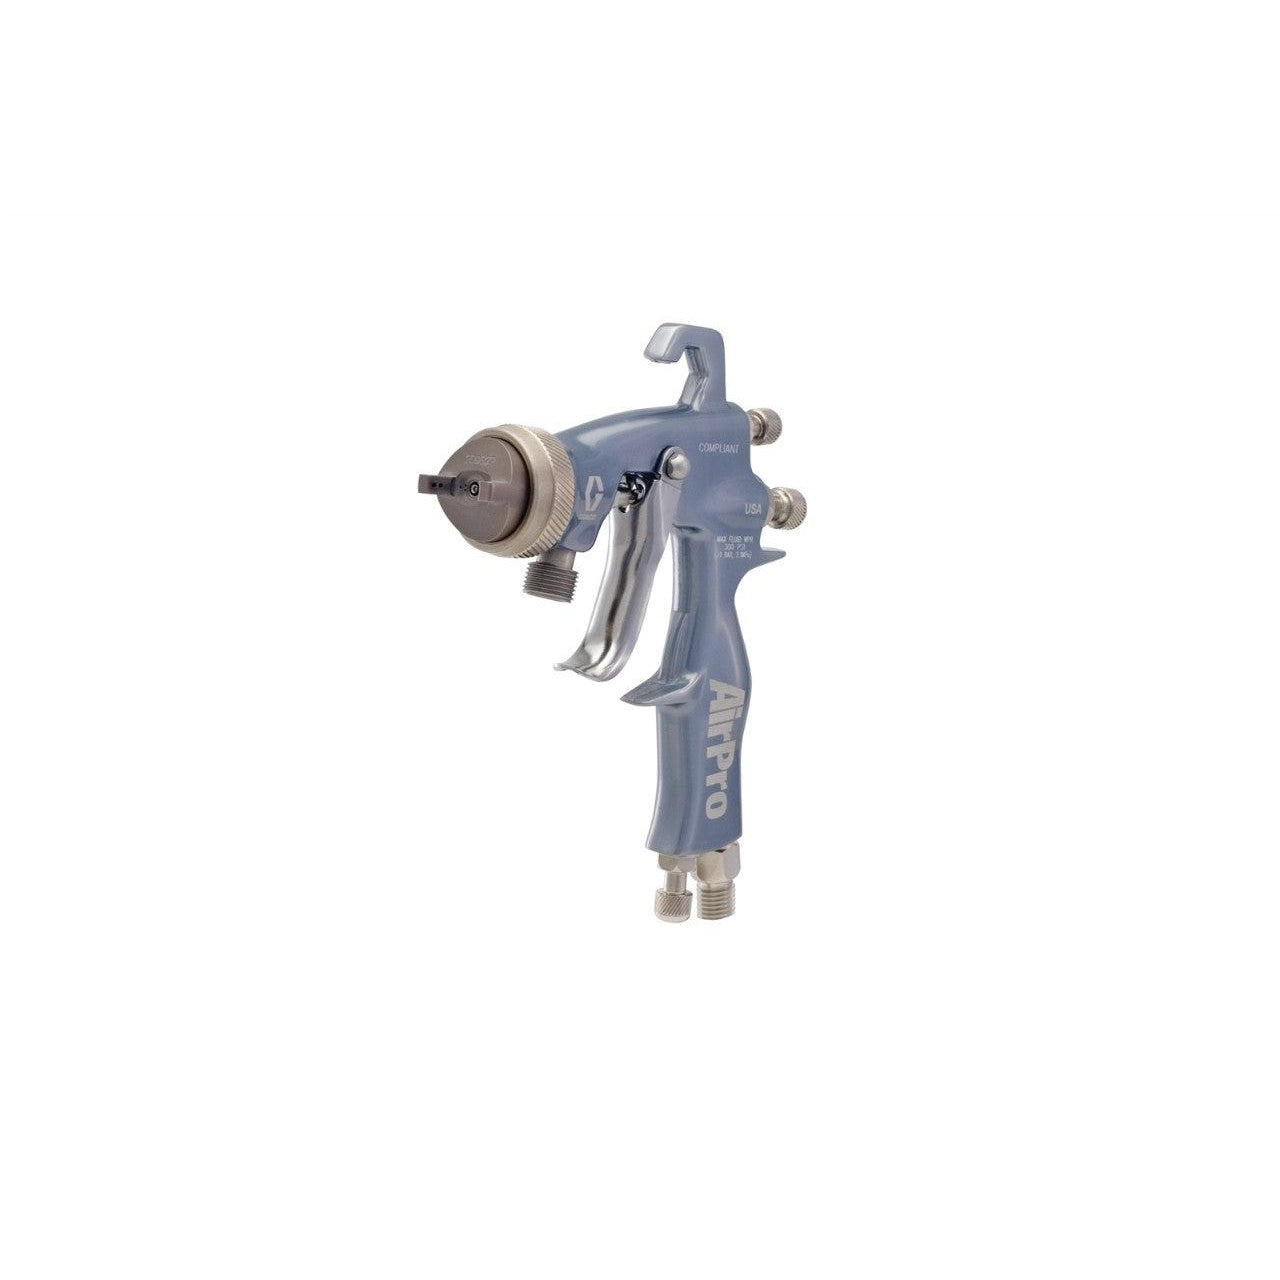 AirPro Air Spray Pressure Feed Gun, Compliant, 0.042 inch (1.1 mm) Nozzle, for General Metal Applications